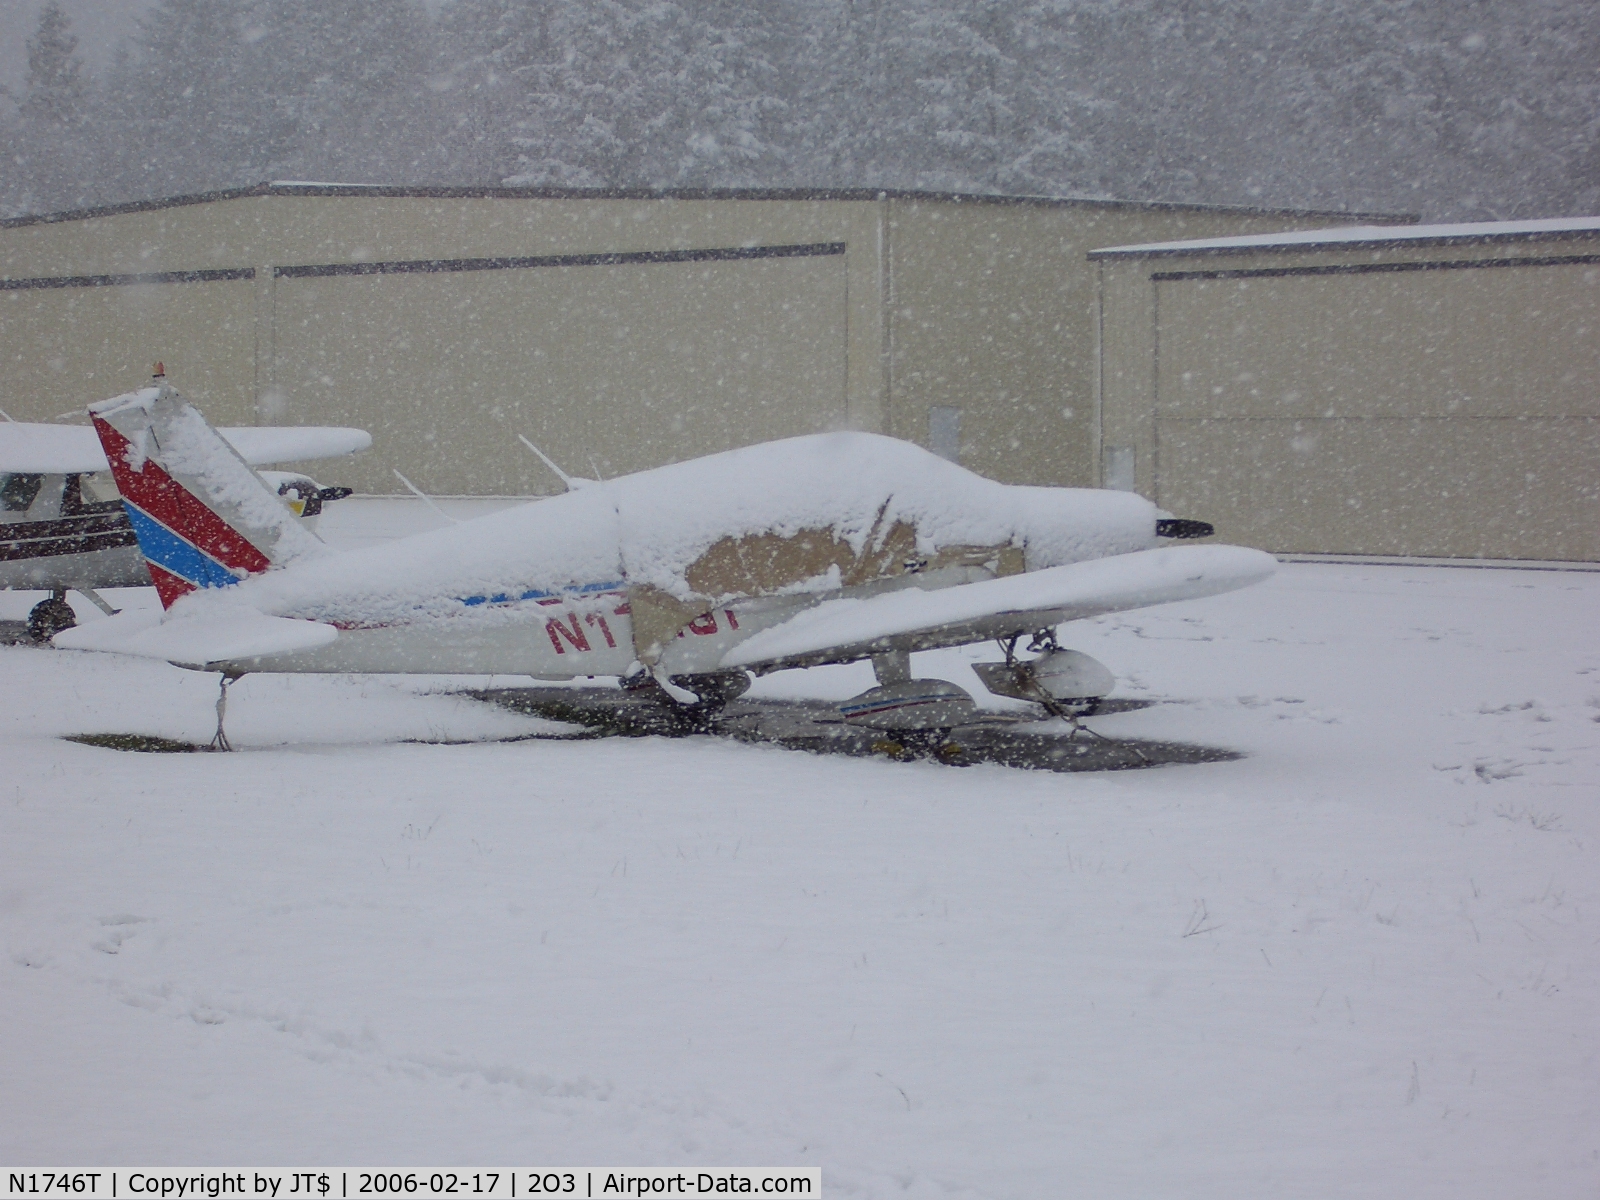 N1746T, 1970 Piper PA-28-140 Cherokee C/N 28-7125064, 46T in the Snow at Angwin